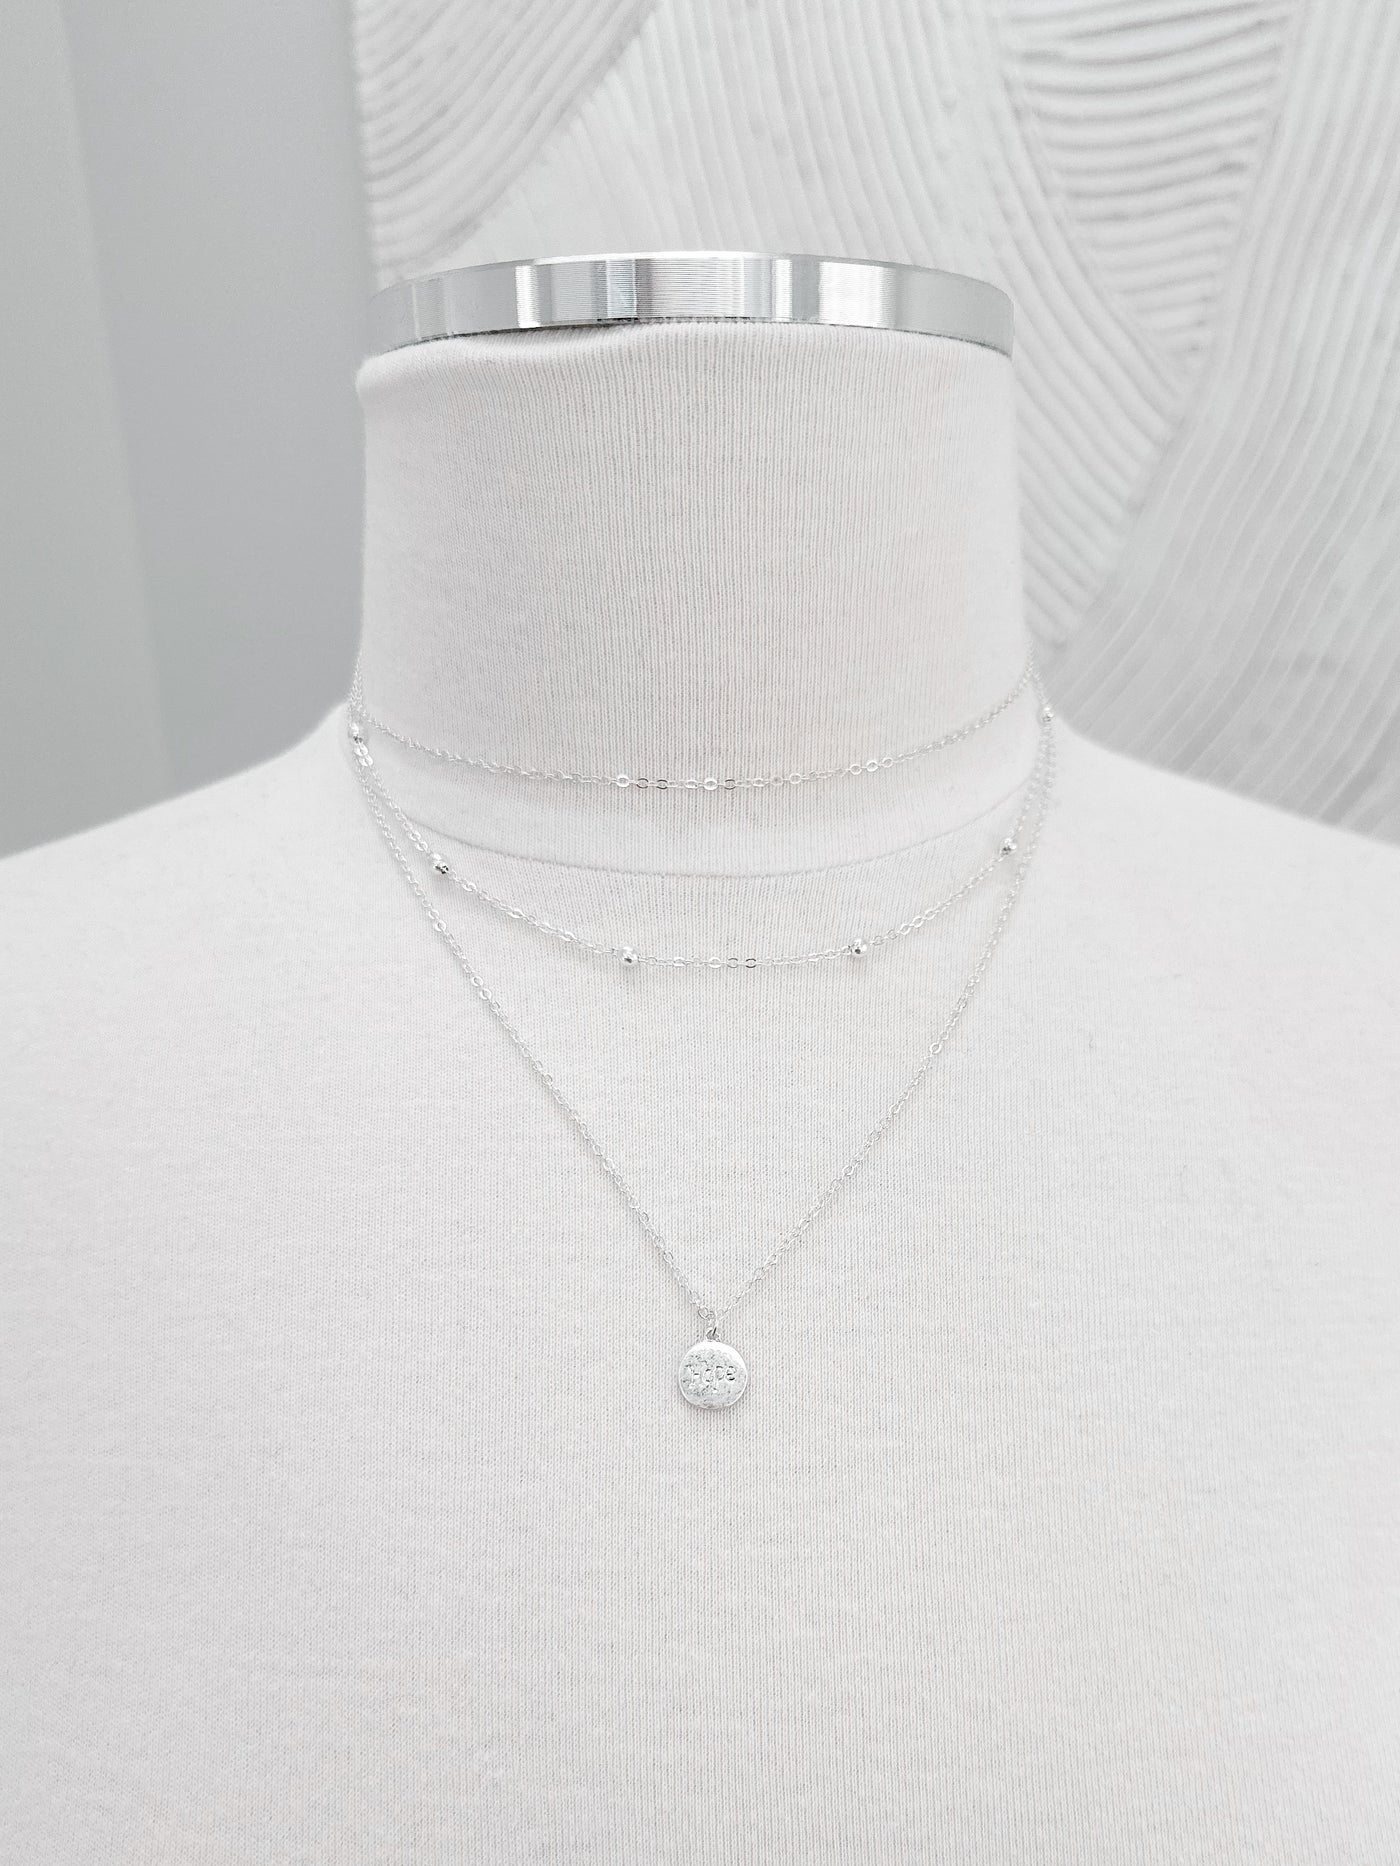 Layla Layer Necklace in Silver